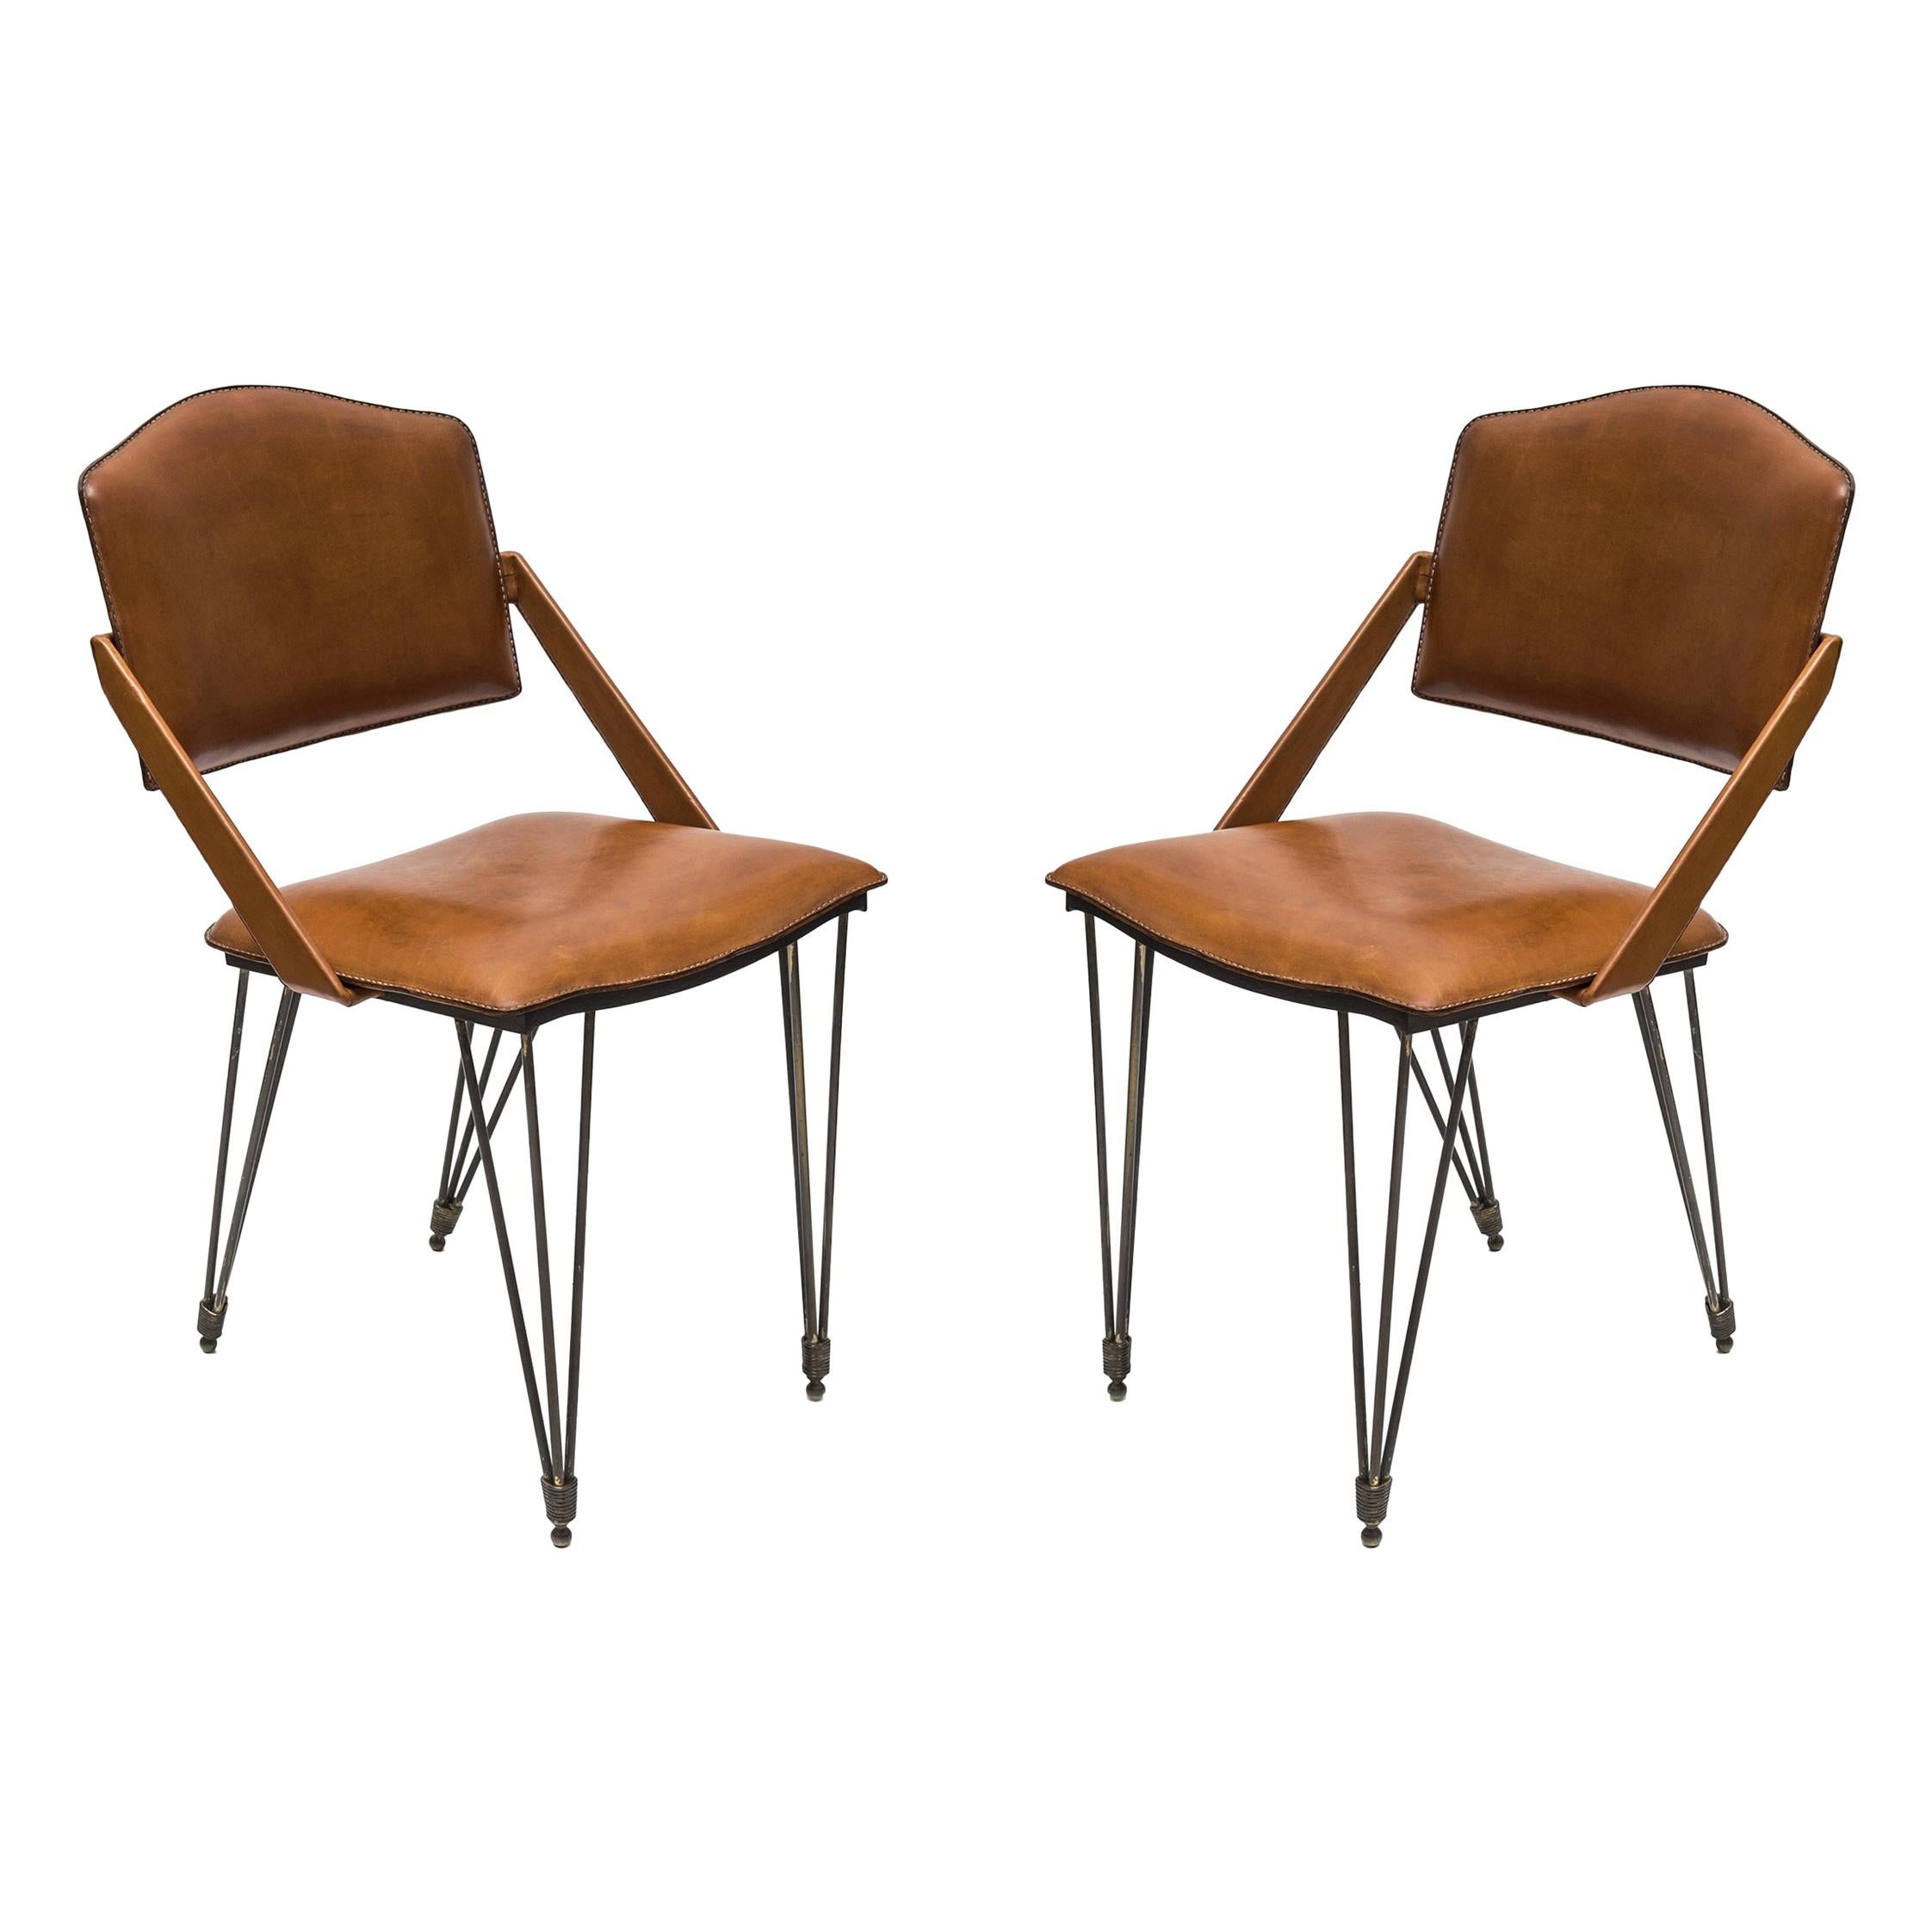 Pair of Stitched Leather Armchairs by Jacques Adnet For Sale